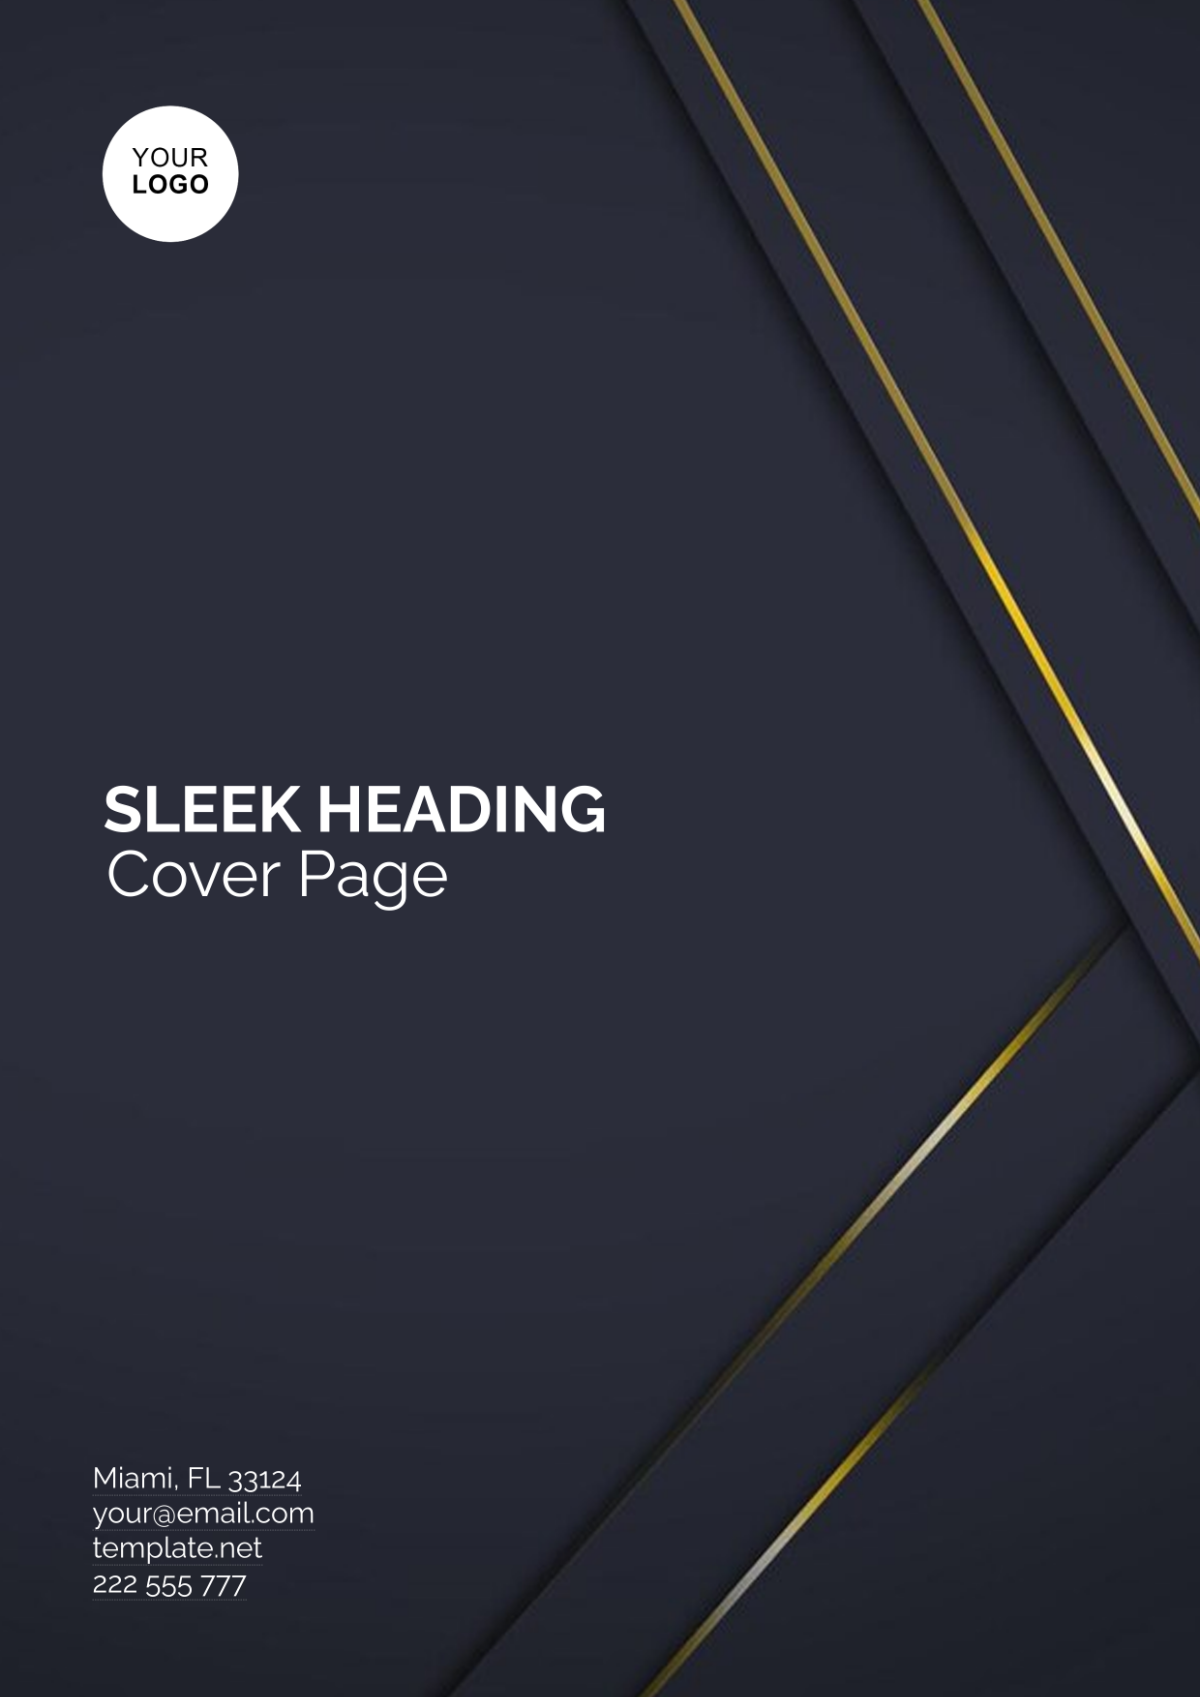 Free Sleek Heading Cover Page Template